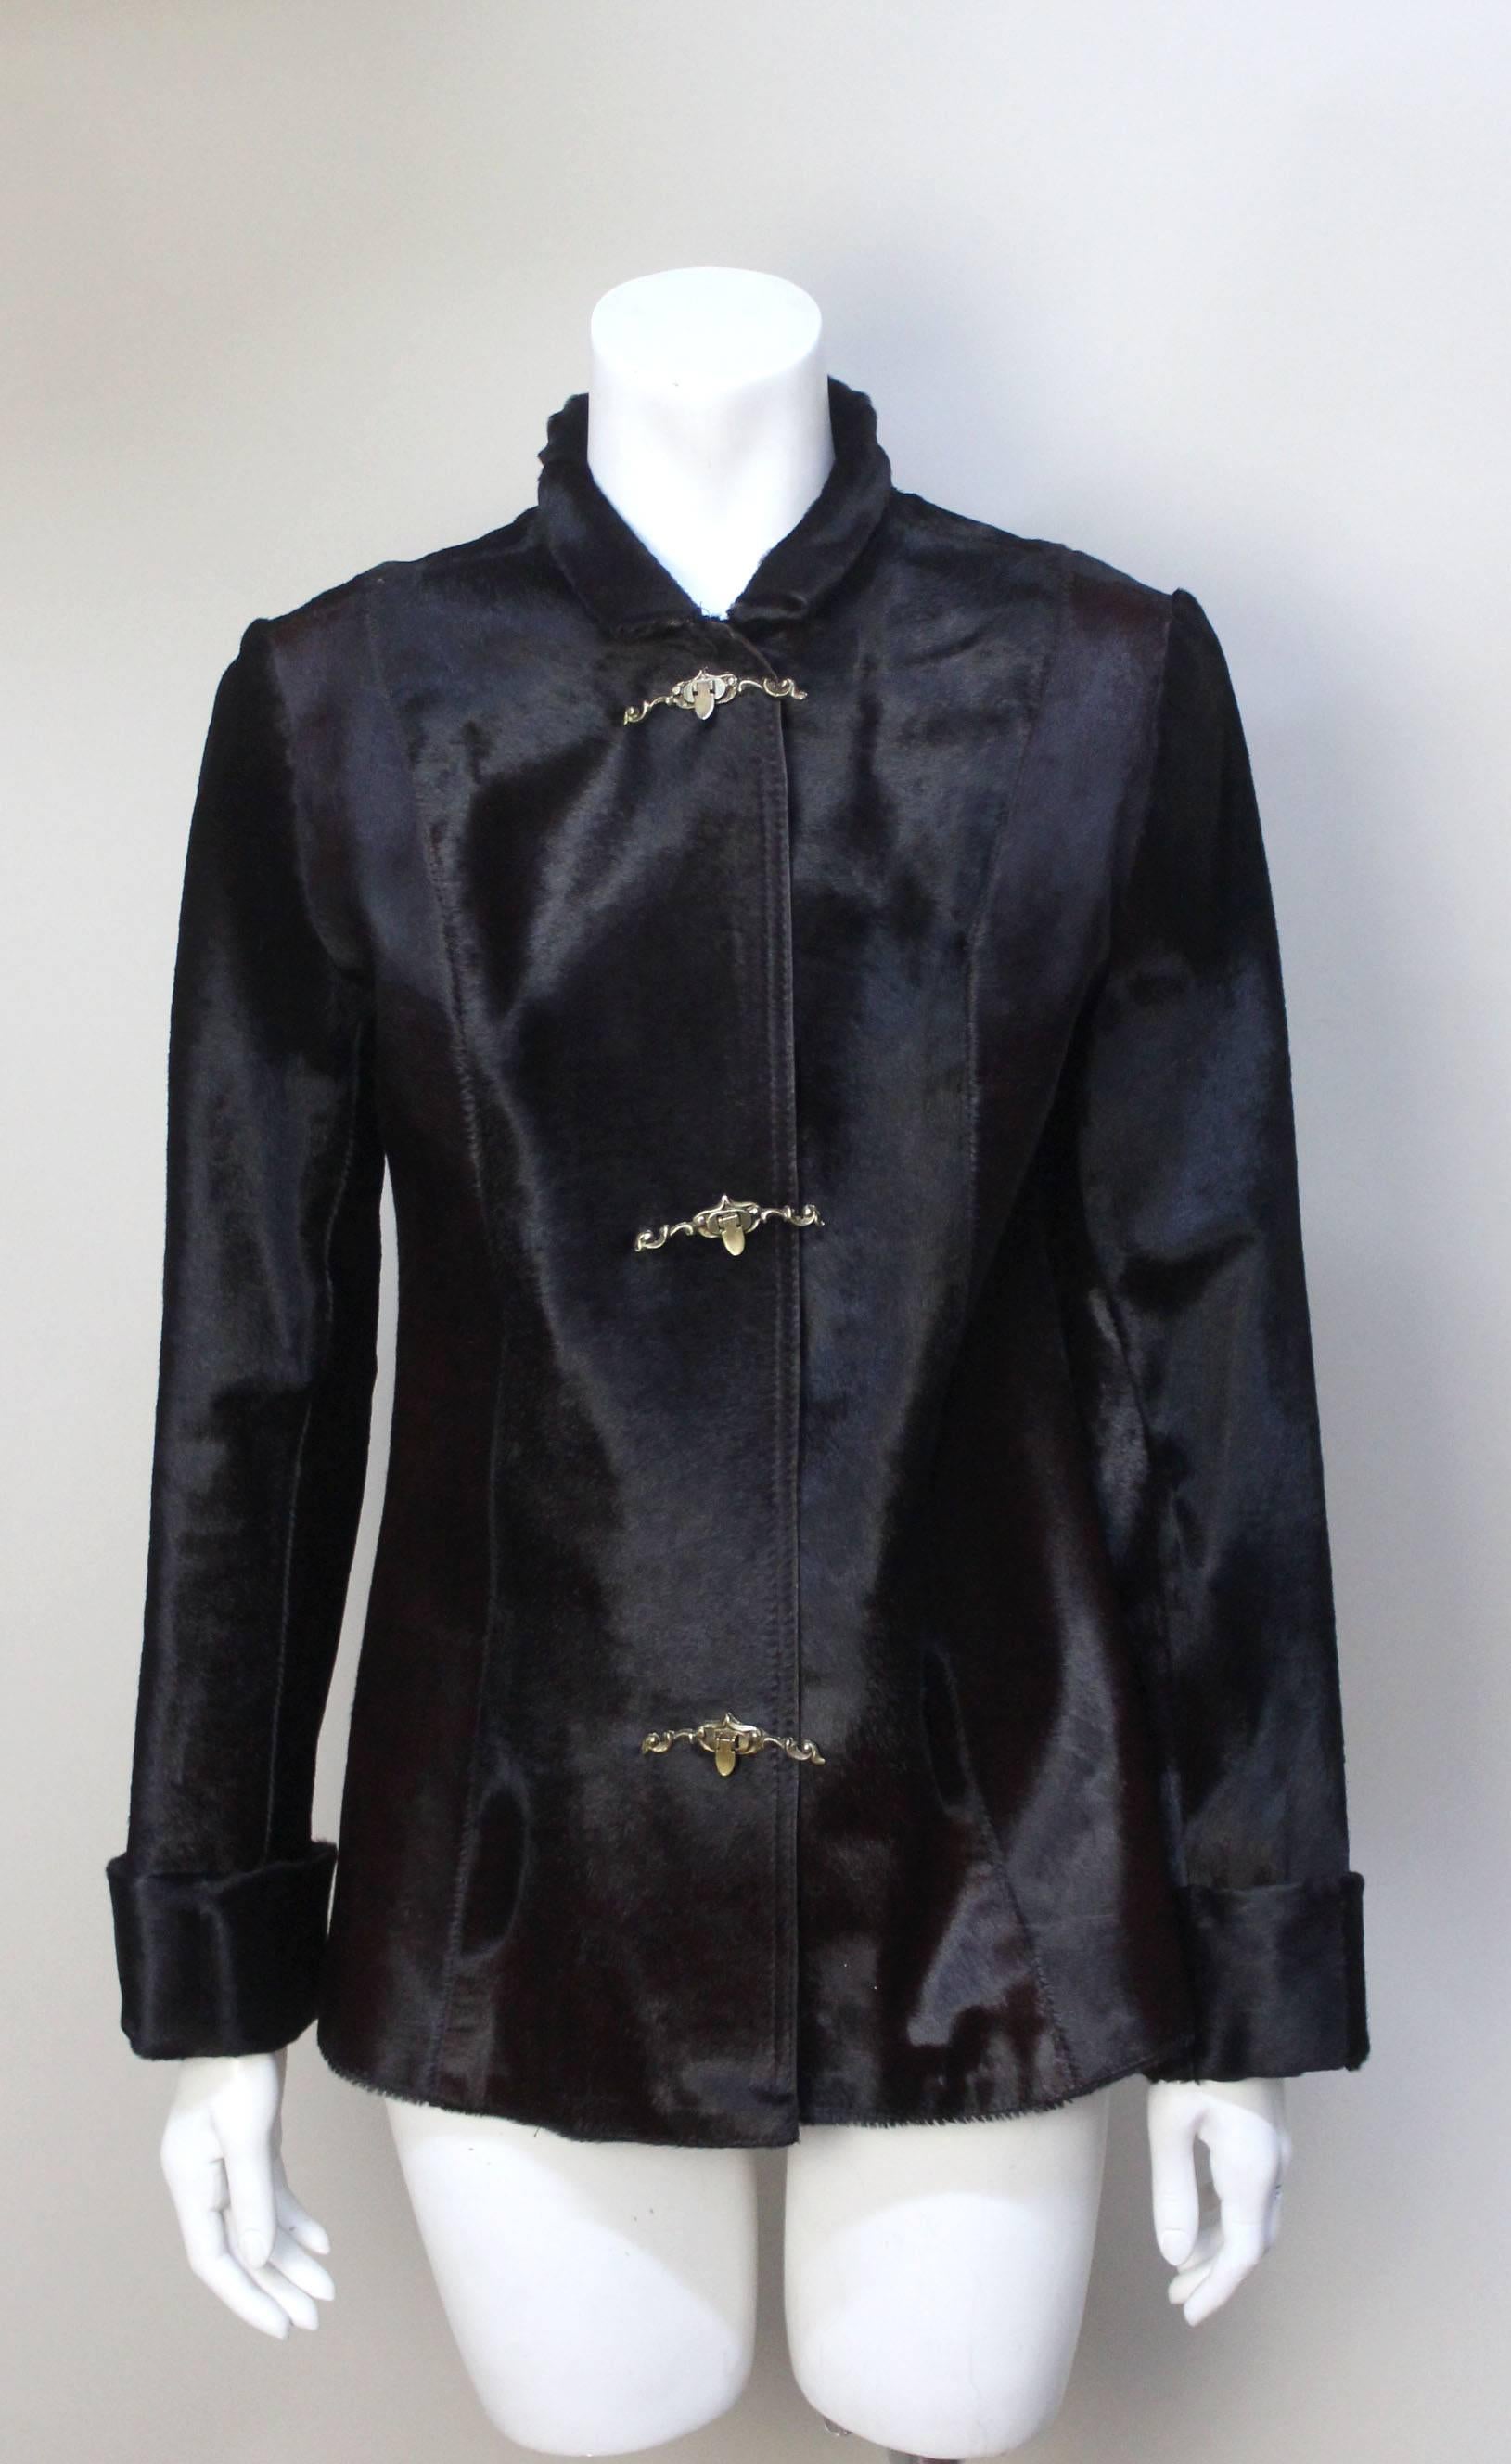 This jacket is a vintage gem. It is a custom made piece with extraordinary detail. The jacket is fitted with long narrow sleeves, wide cuffs, and a high rolled collar. The style is very much what was worn in the Edwardian era. The ponyskin is a